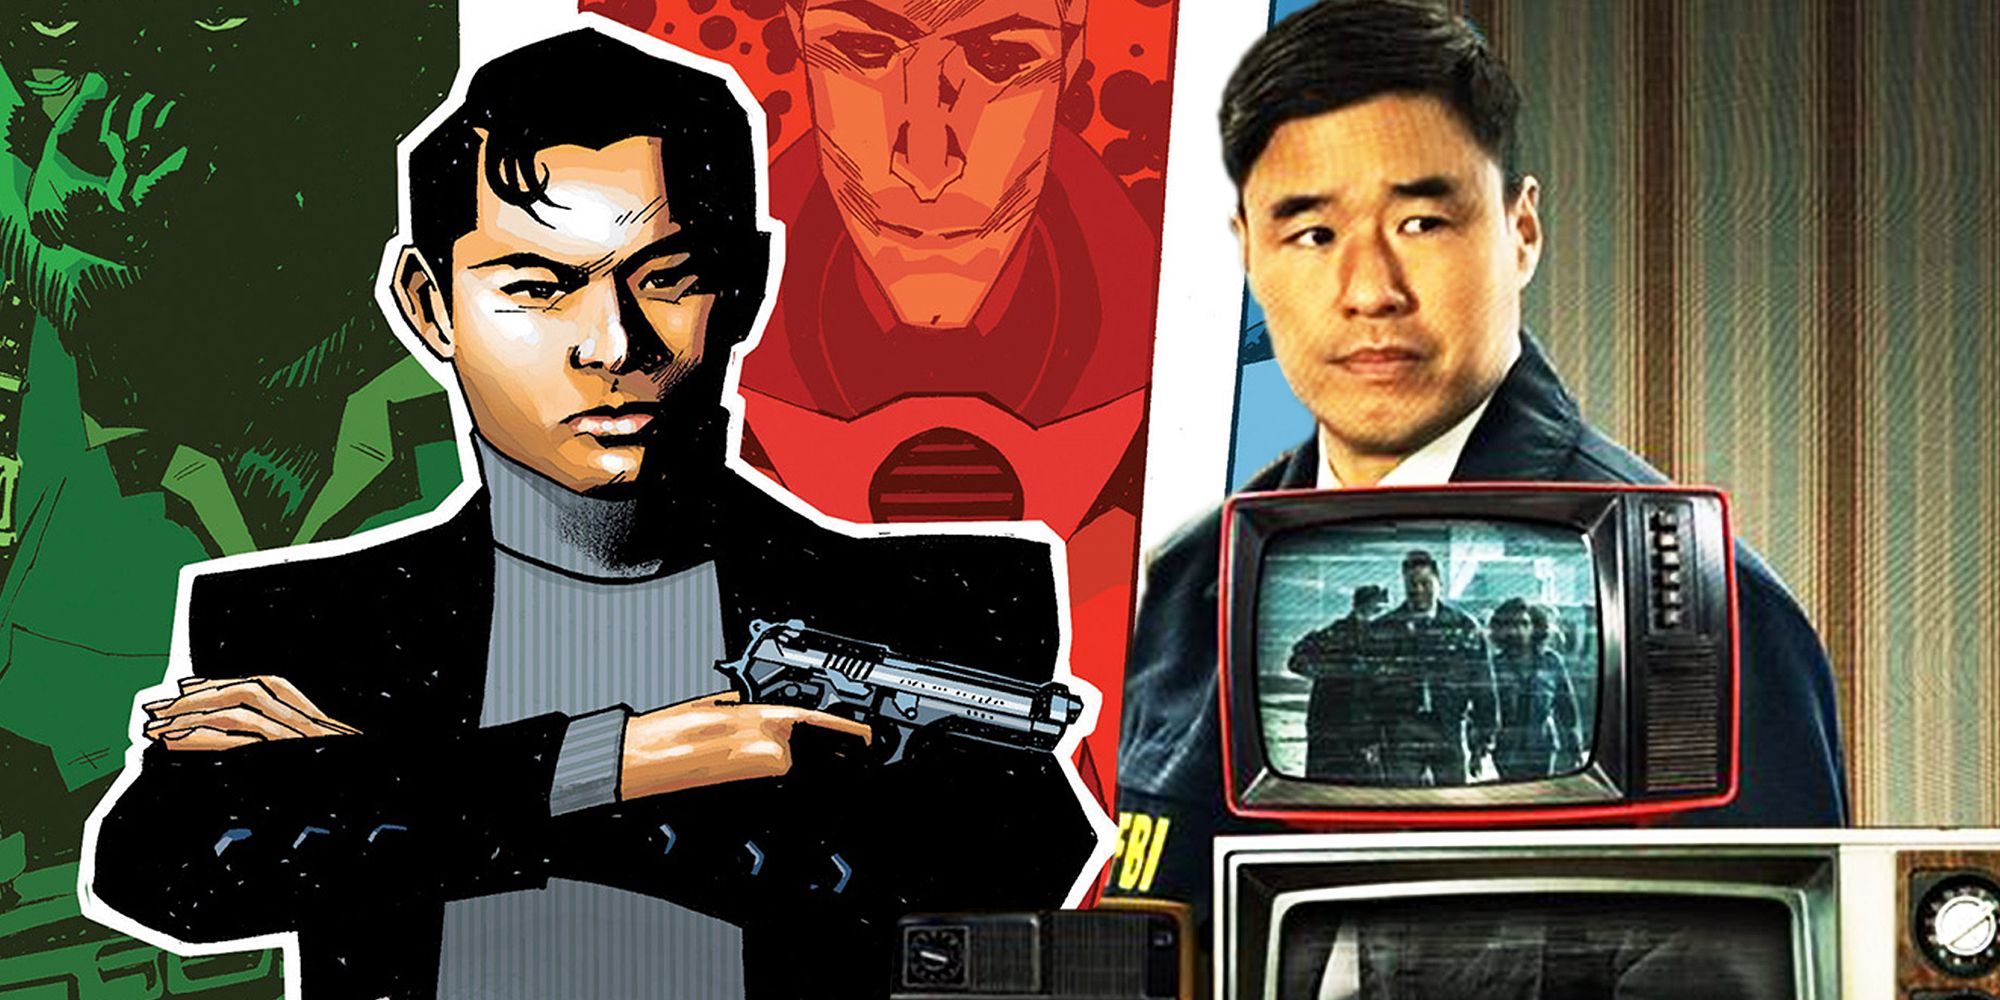 Randall Park as Jimmy Woo in WandaVision and Marvel Comics Agents of Atlas